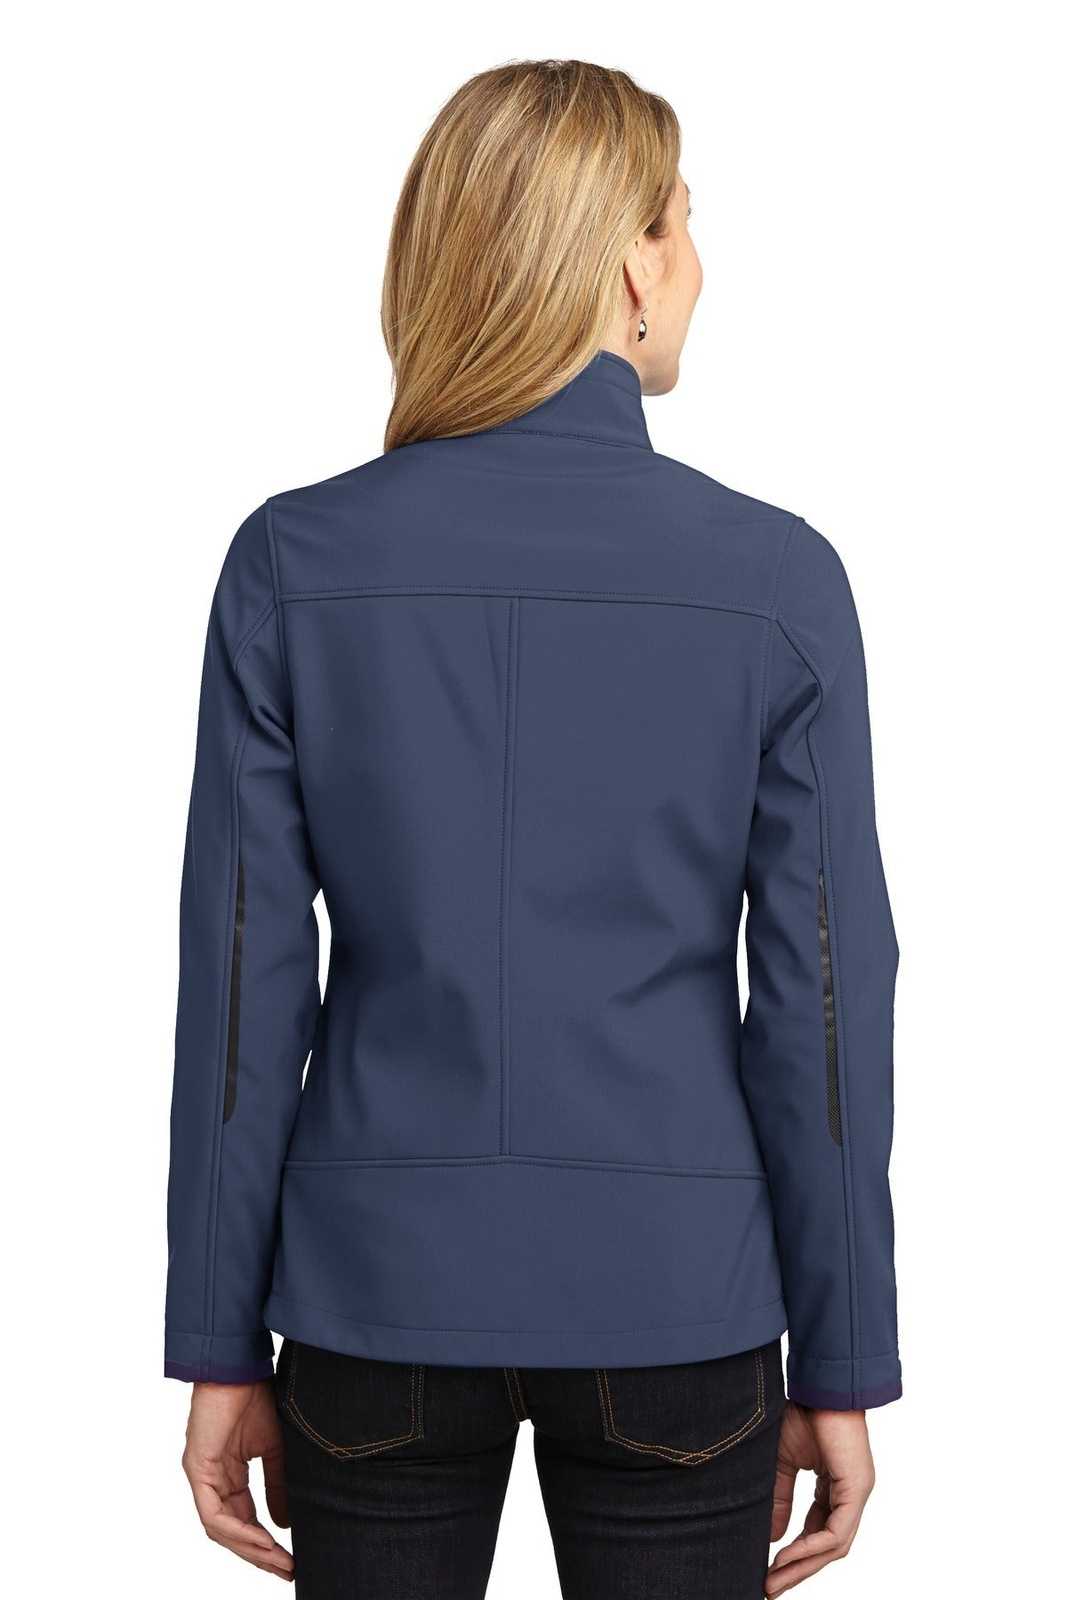 Port Authority L324 Ladies Welded Soft Shell Jacket - Dress Blue Navy - HIT a Double - 2